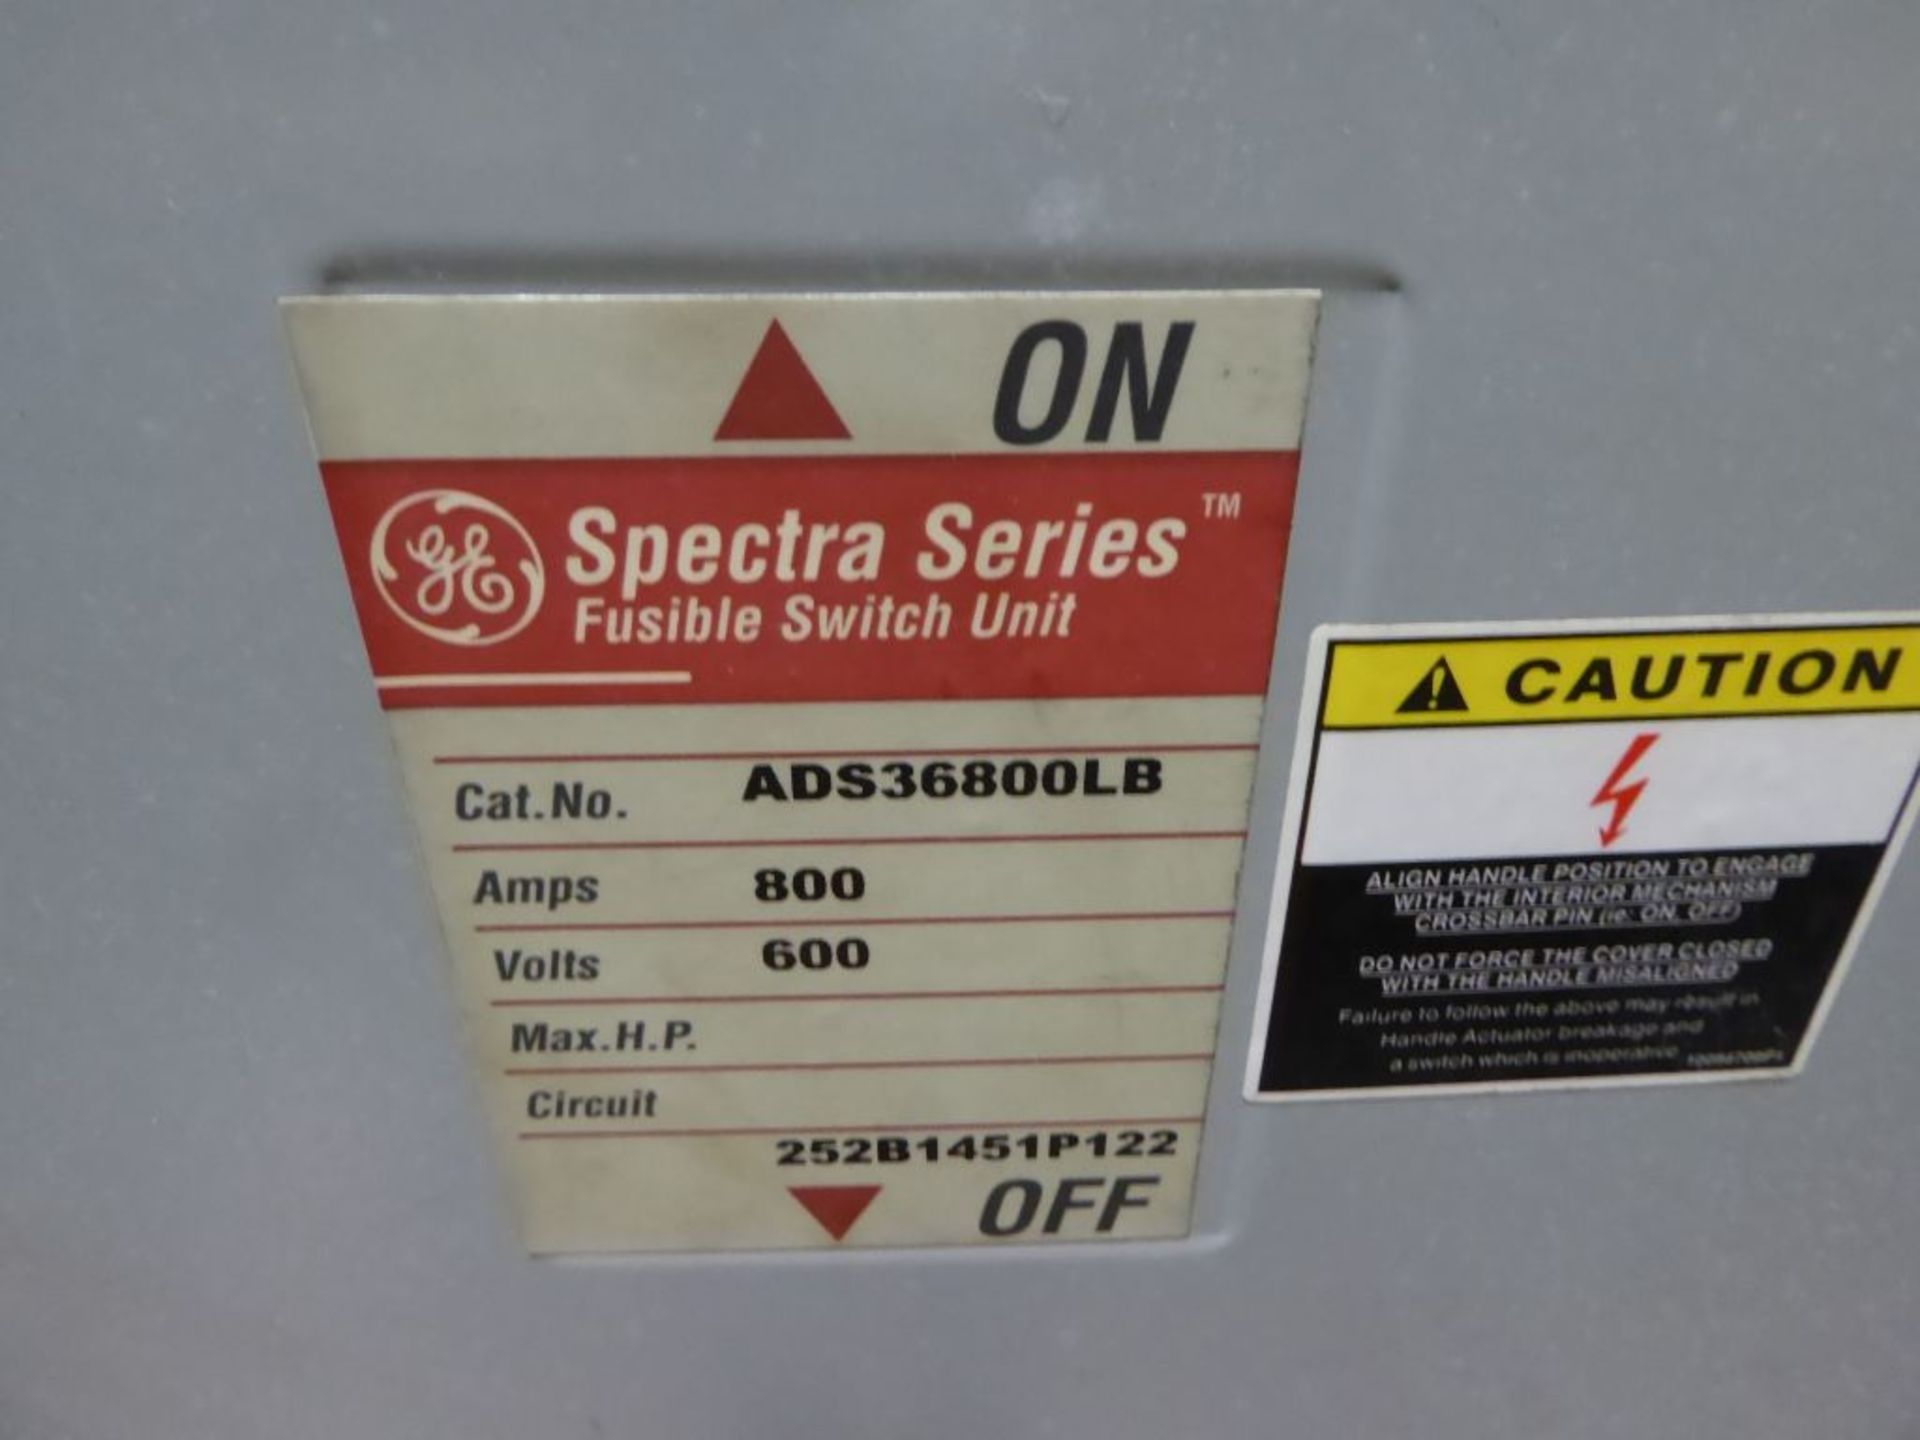 GE Spectra Series Fusible Switch Unit - Image 5 of 18